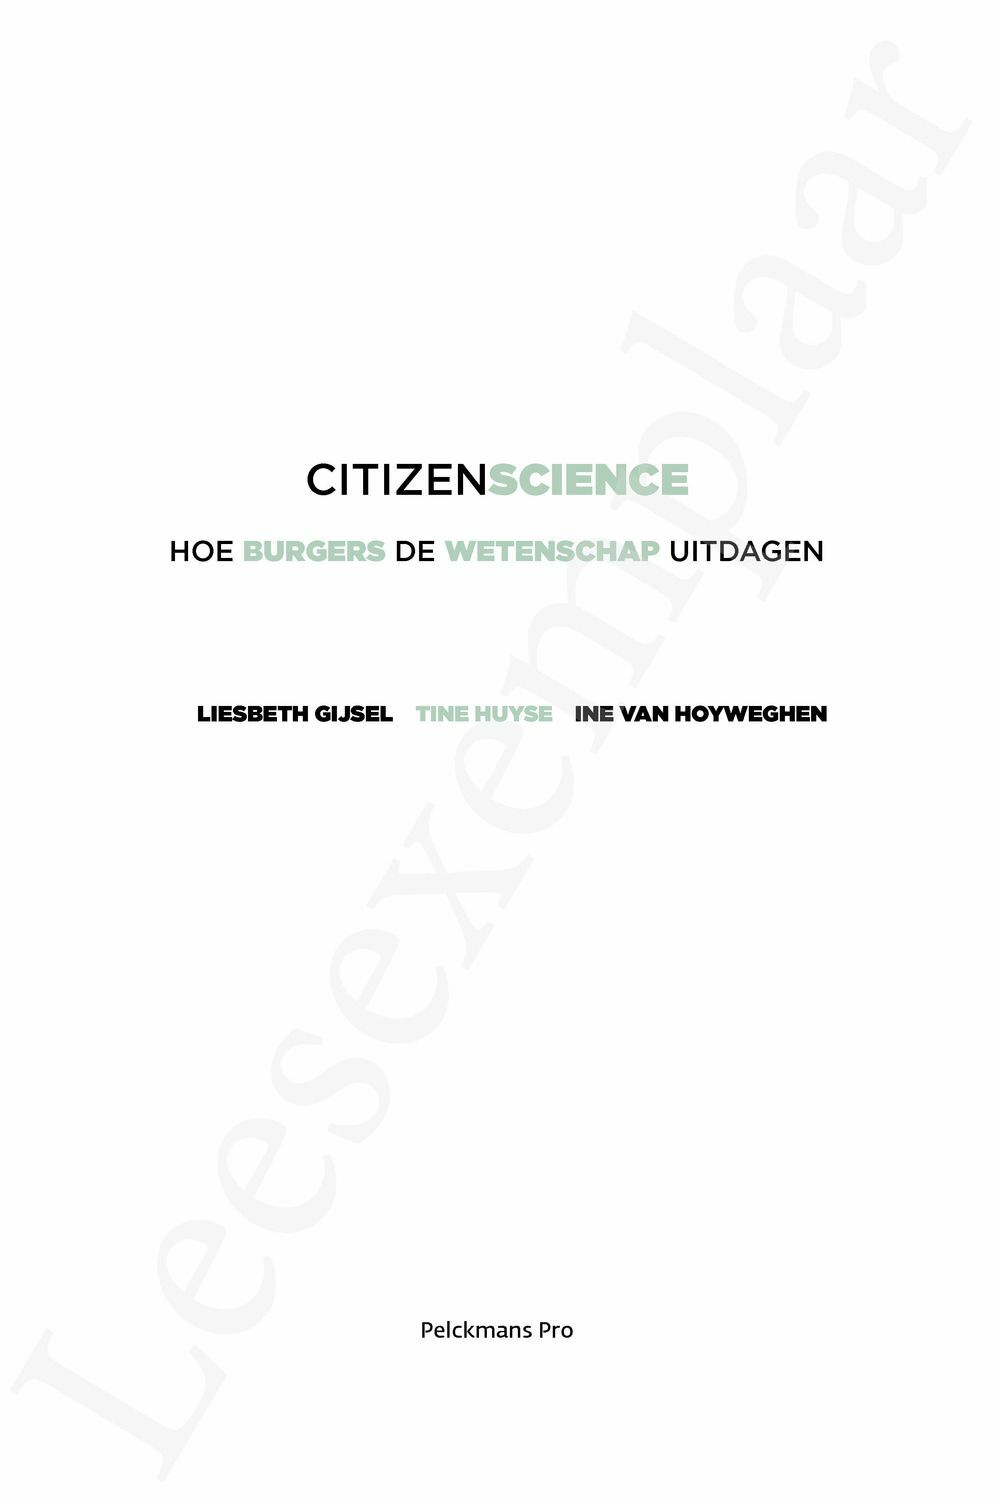 Preview: Citizen science